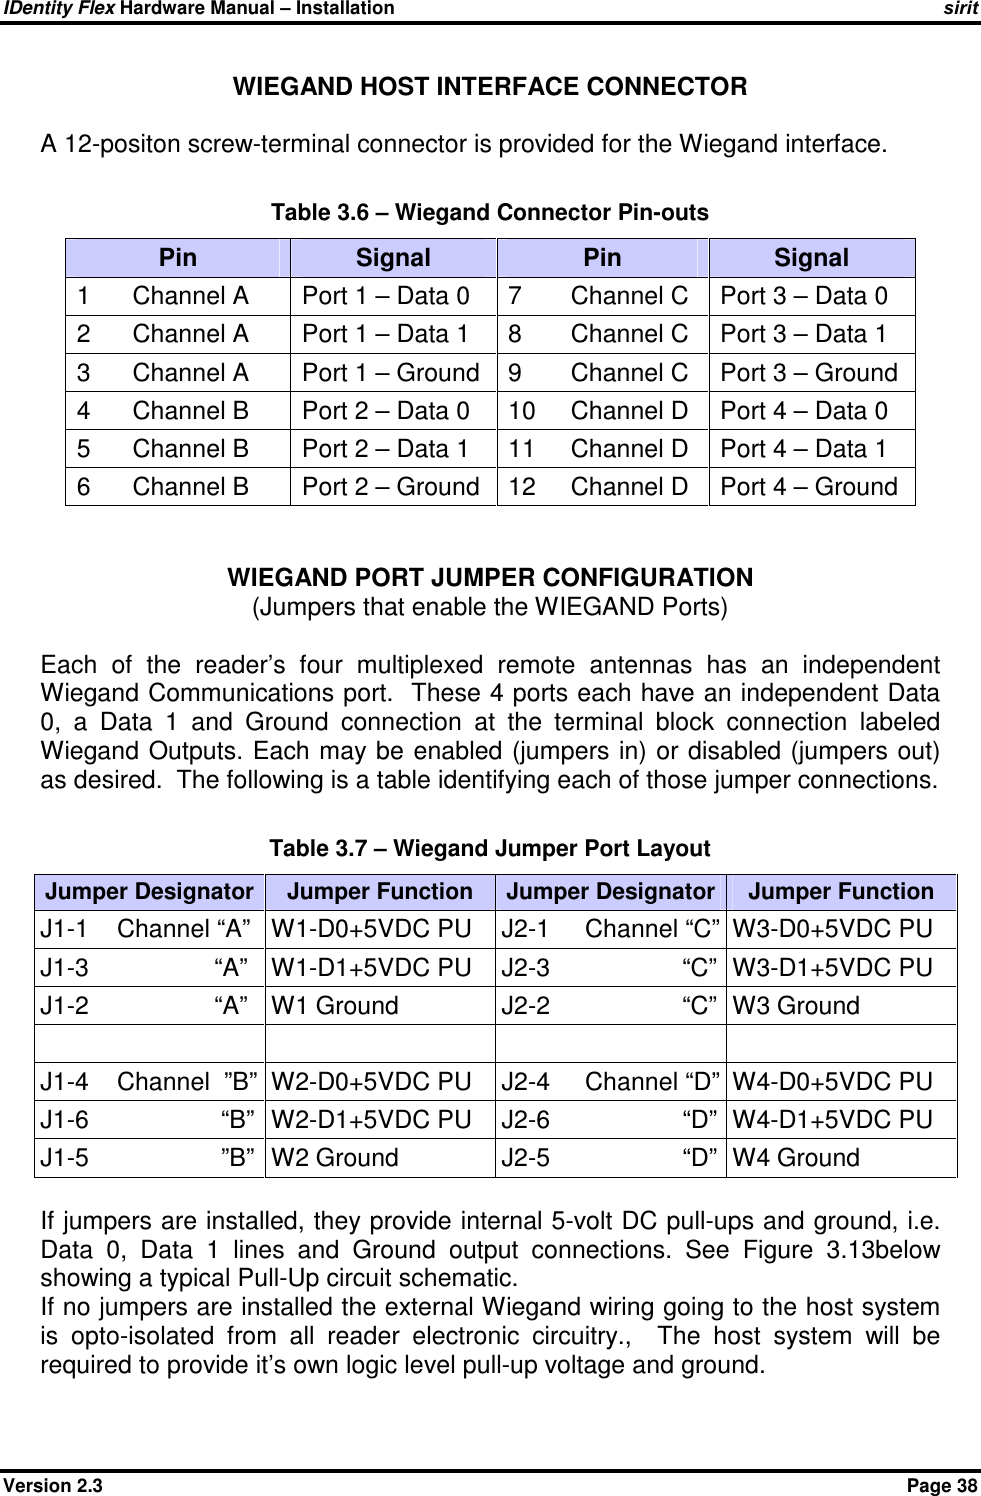 IDentity Flex Hardware Manual – Installation   sirit Version 2.3    Page 38 WIEGAND HOST INTERFACE CONNECTOR    A 12-positon screw-terminal connector is provided for the Wiegand interface.    Table 3.6 – Wiegand Connector Pin-outs Pin  Signal  Pin  Signal 1      Channel A  Port 1 – Data 0  7       Channel C  Port 3 – Data 0 2      Channel A  Port 1 – Data 1  8       Channel C  Port 3 – Data 1 3      Channel A  Port 1 – Ground  9       Channel C  Port 3 – Ground 4      Channel B     Port 2 – Data 0  10     Channel D  Port 4 – Data 0 5      Channel B  Port 2 – Data 1  11     Channel D  Port 4 – Data 1 6      Channel B  Port 2 – Ground  12     Channel D  Port 4 – Ground     WIEGAND PORT JUMPER CONFIGURATION (Jumpers that enable the WIEGAND Ports)  Each  of  the  reader’s  four  multiplexed  remote  antennas  has  an  independent Wiegand Communications port.  These 4 ports each have an independent Data 0,  a  Data  1  and  Ground  connection  at  the  terminal  block  connection  labeled Wiegand Outputs. Each may be enabled (jumpers in) or disabled (jumpers out) as desired.  The following is a table identifying each of those jumper connections.  Table 3.7 – Wiegand Jumper Port Layout Jumper Designator Jumper Function  Jumper Designator Jumper Function J1-1    Channel “A”  W1-D0+5VDC PU  J2-1     Channel “C” W3-D0+5VDC PU J1-3                  “A”  W1-D1+5VDC PU  J2-3                   “C” W3-D1+5VDC PU J1-2                  “A”  W1 Ground  J2-2                   “C” W3 Ground        J1-4    Channel  ”B” W2-D0+5VDC PU  J2-4     Channel “D” W4-D0+5VDC PU J1-6                   “B” W2-D1+5VDC PU  J2-6                   “D” W4-D1+5VDC PU J1-5                   ”B” W2 Ground  J2-5                   “D” W4 Ground     If jumpers are installed, they provide internal 5-volt DC pull-ups and ground, i.e. Data  0,  Data  1  lines  and  Ground  output  connections.  See  Figure  3.13below showing a typical Pull-Up circuit schematic. If no jumpers are installed the external Wiegand wiring going to the host system is  opto-isolated  from  all  reader  electronic  circuitry.,    The  host  system  will  be required to provide it’s own logic level pull-up voltage and ground.  